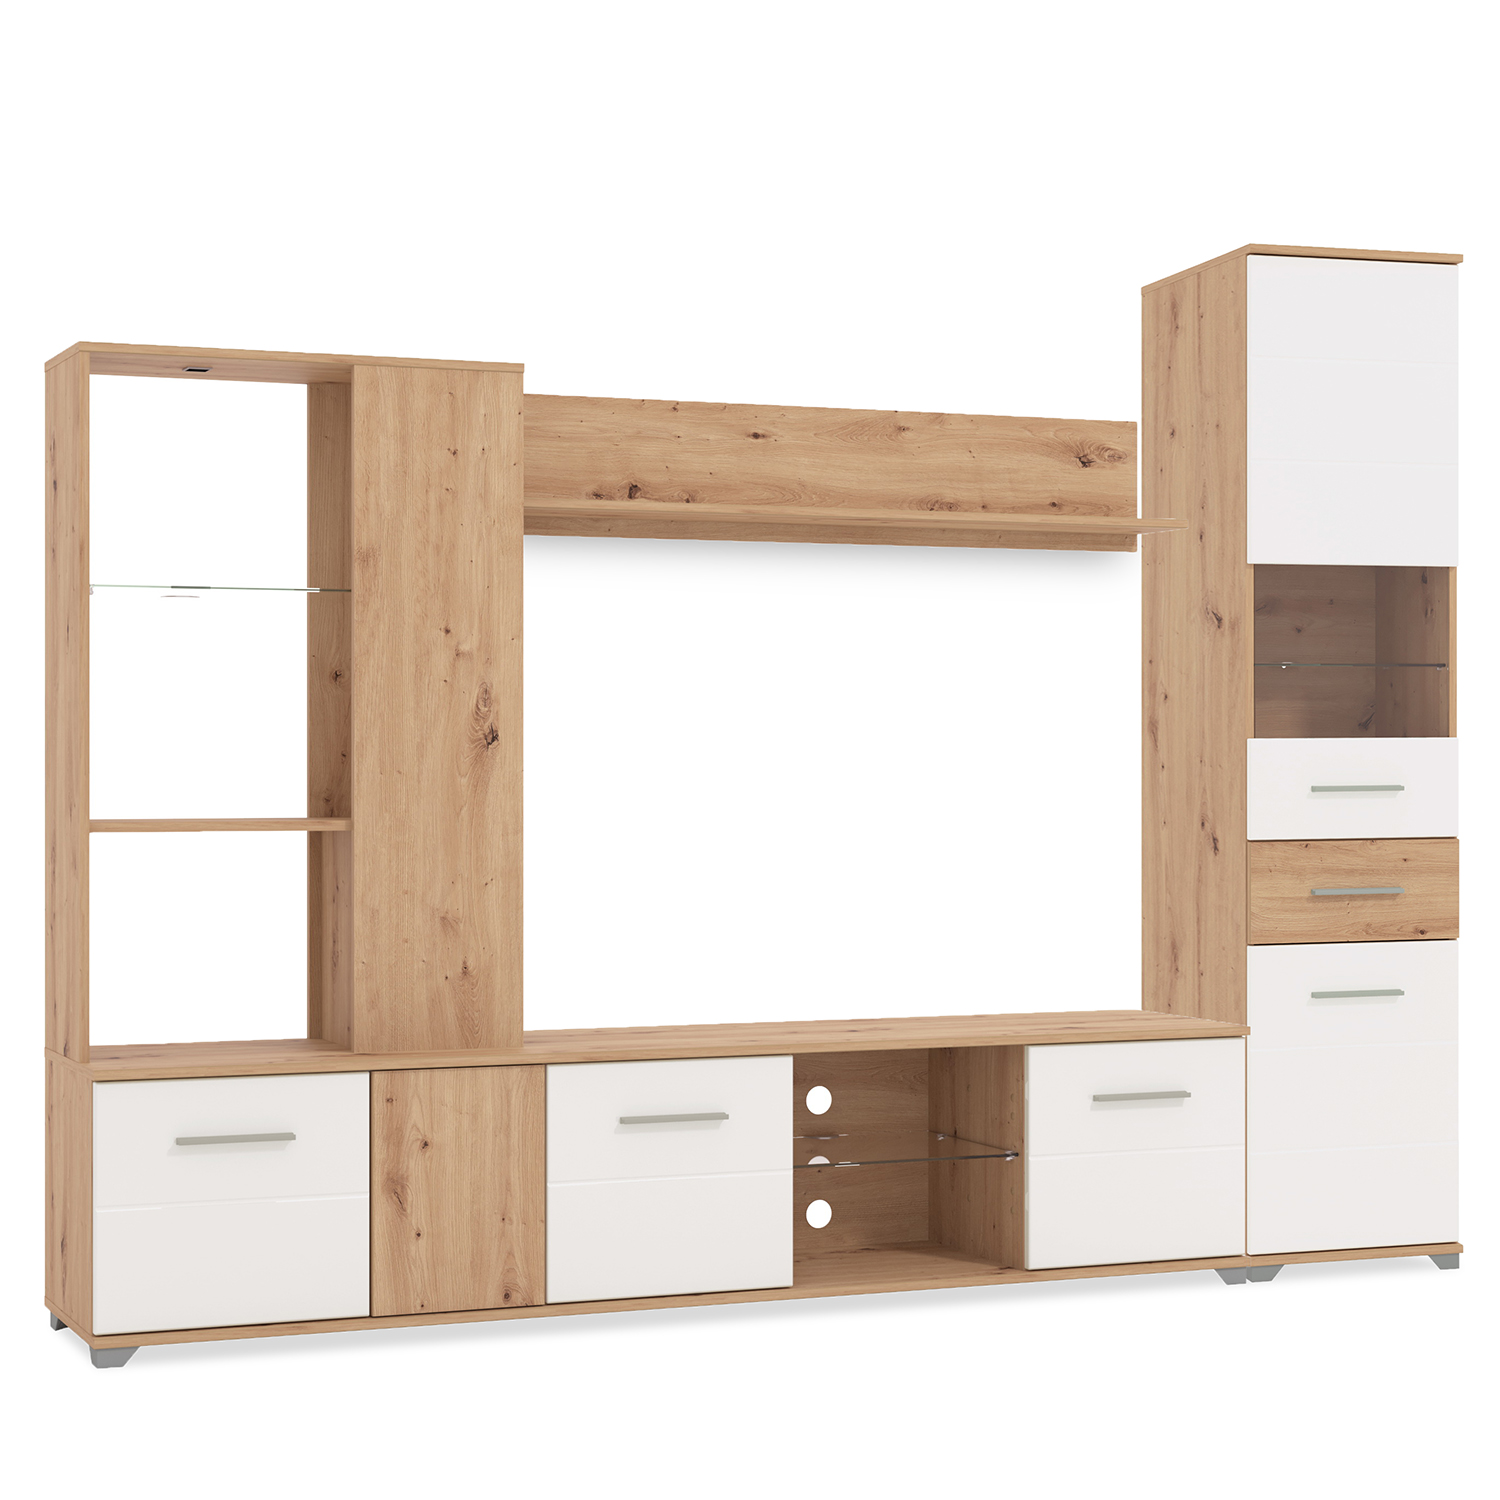 Modern Living Room Unit Cupboard Set Wall Unit TV Set with Storage Entertainment Center Wood Oak White High Gloss